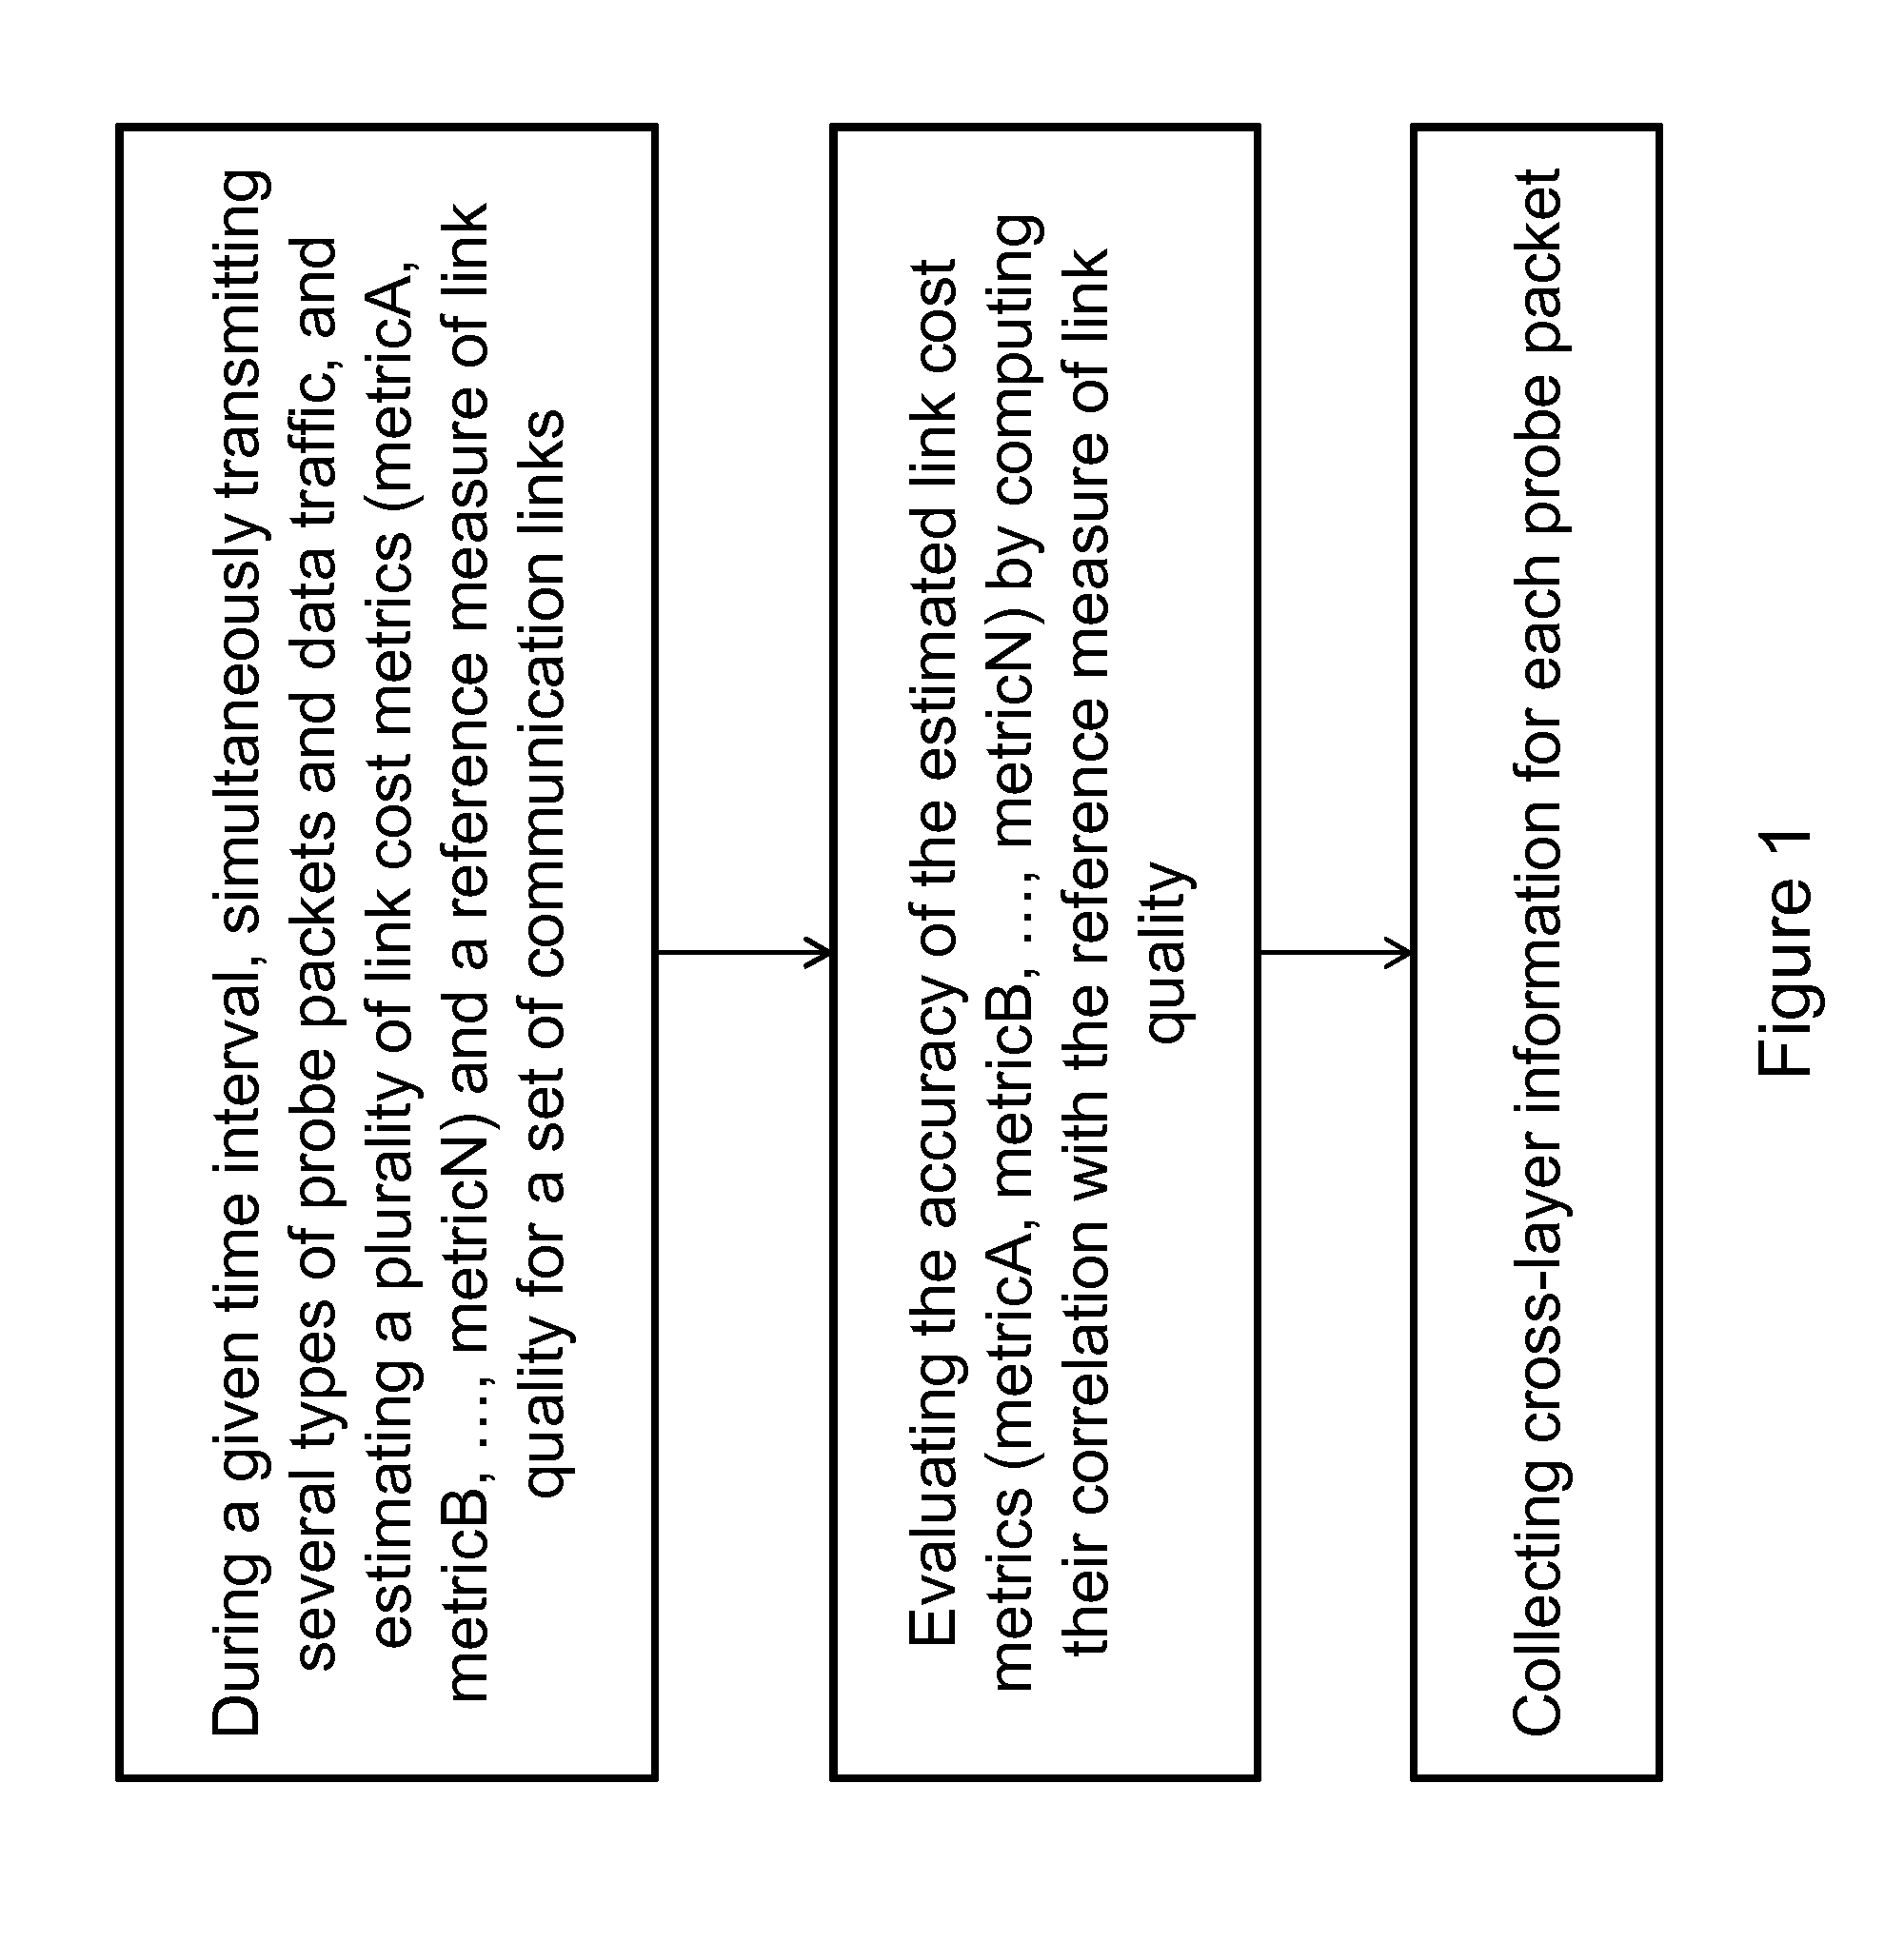 Method for evaluating link cost metrics in communication networks